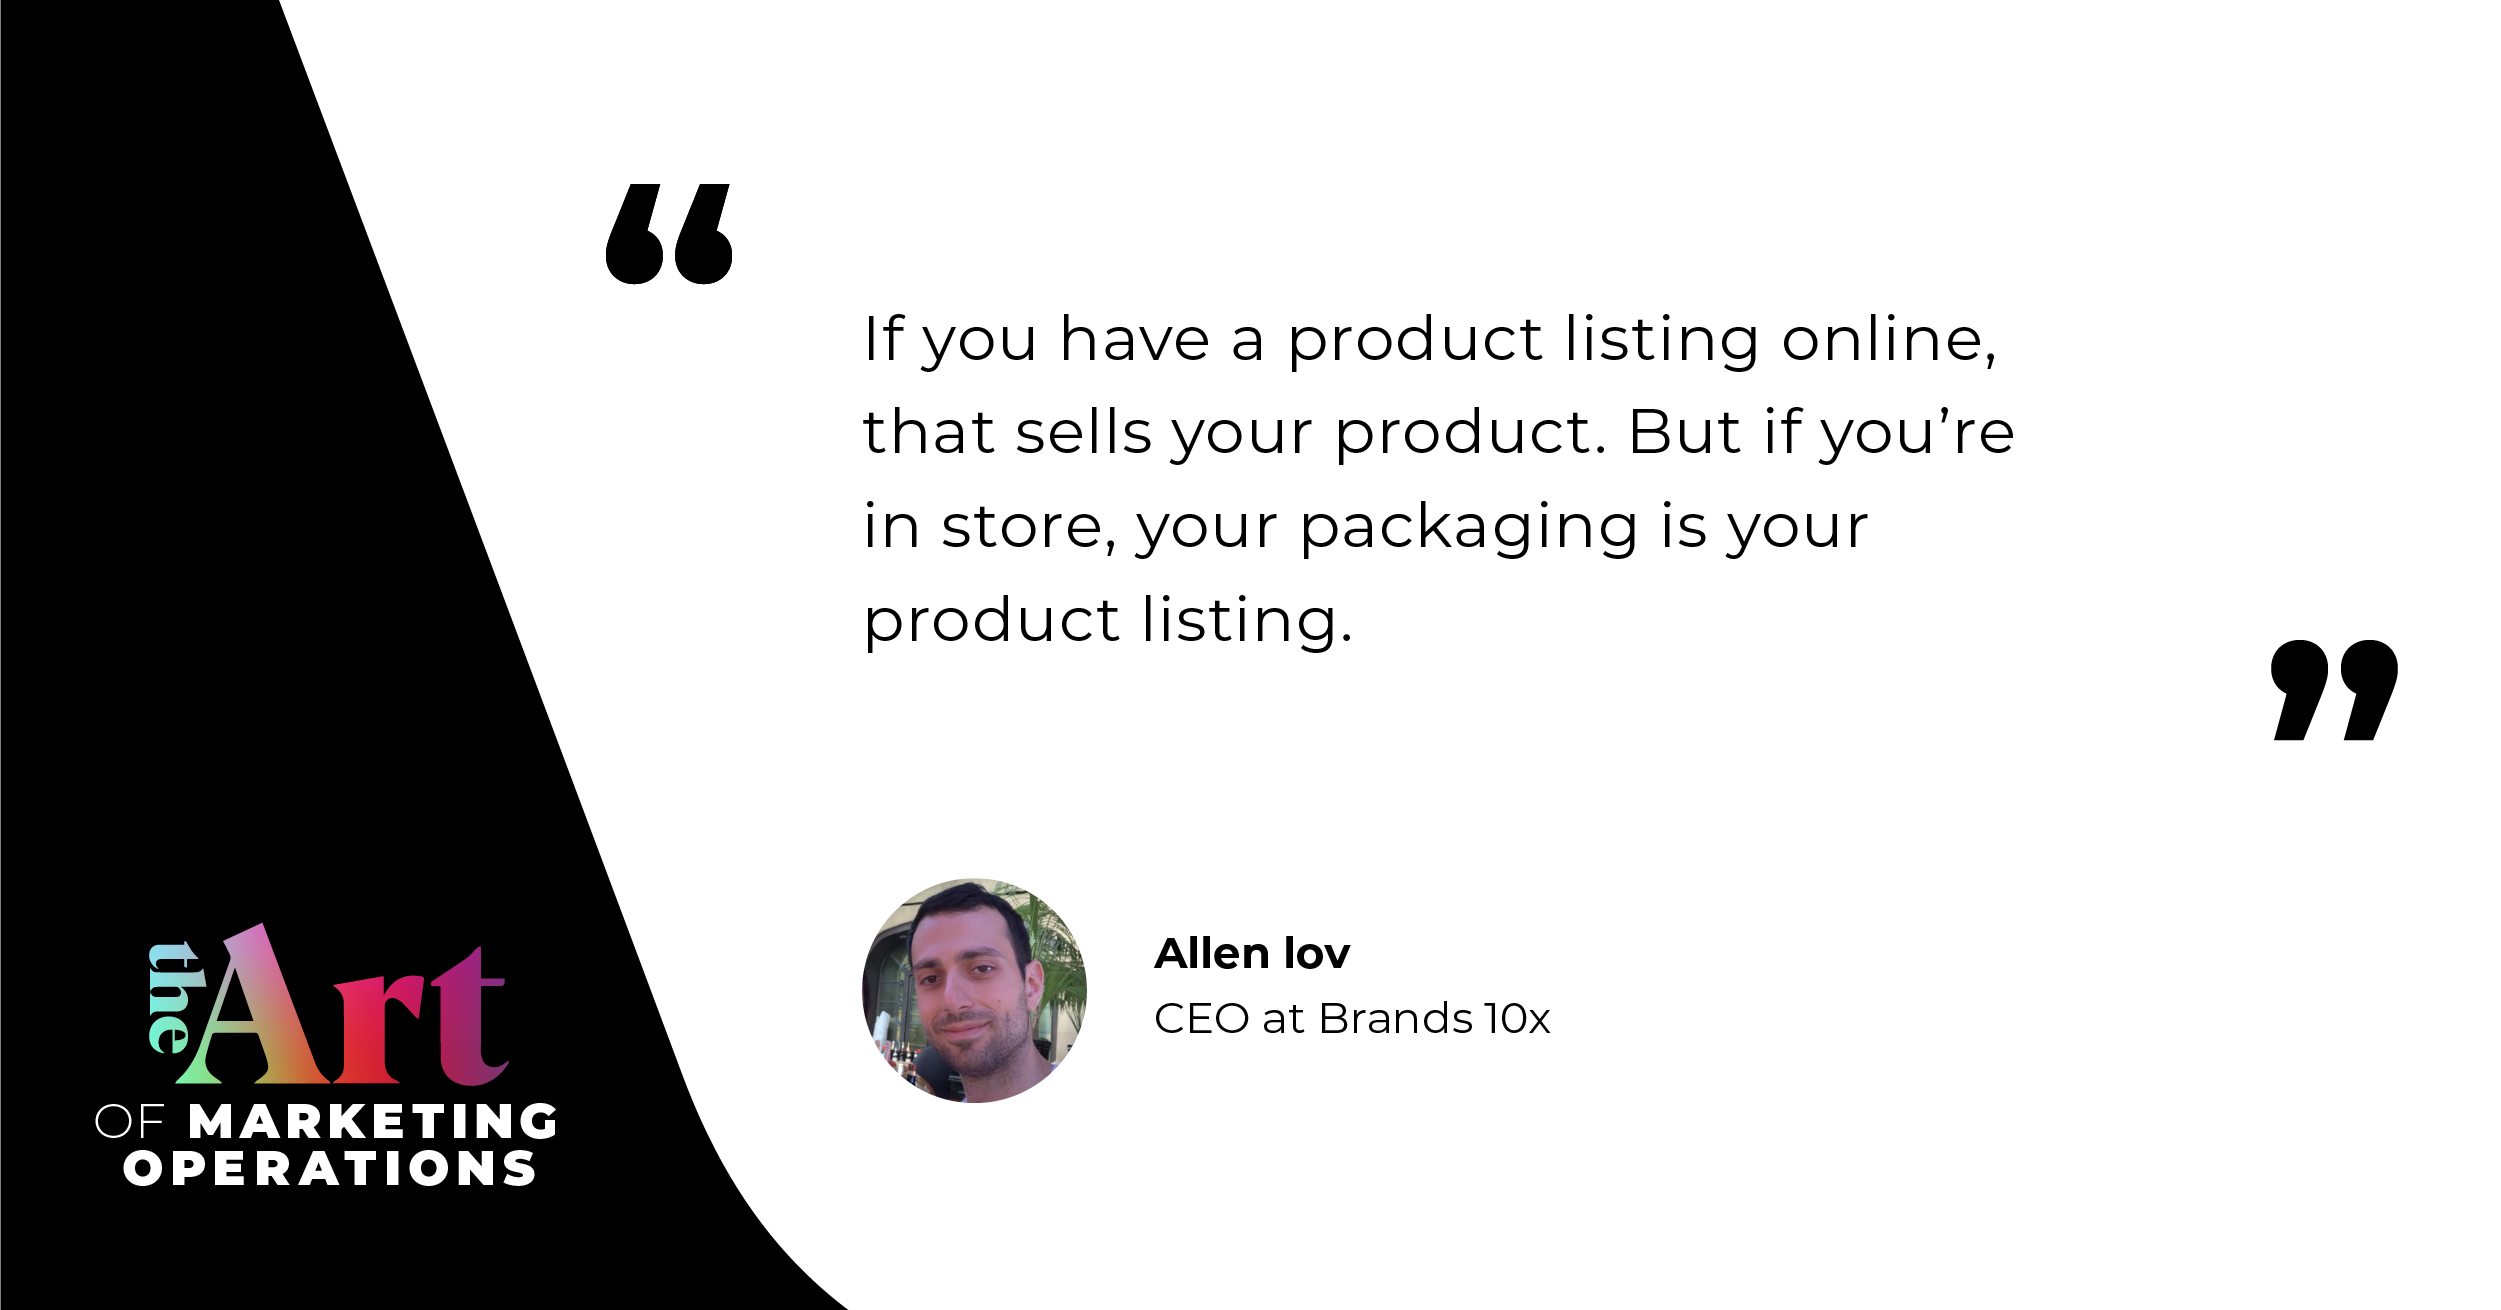 Quote by Allen Iov: “If you have a product listing online, that sells your product. But if you're in-store, your packaging is your product listing.”